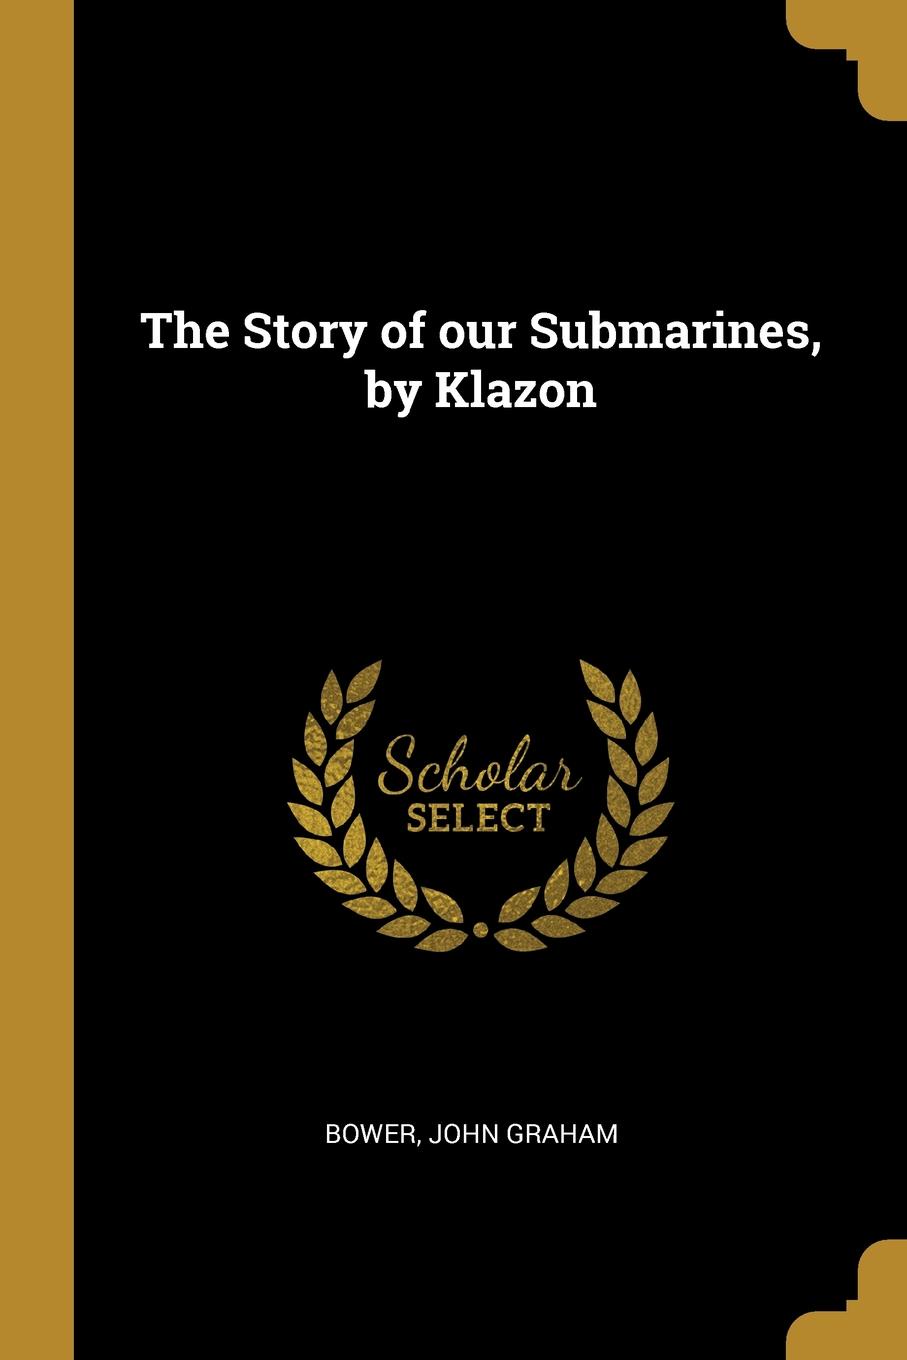 The Story of our Submarines, by Klazon